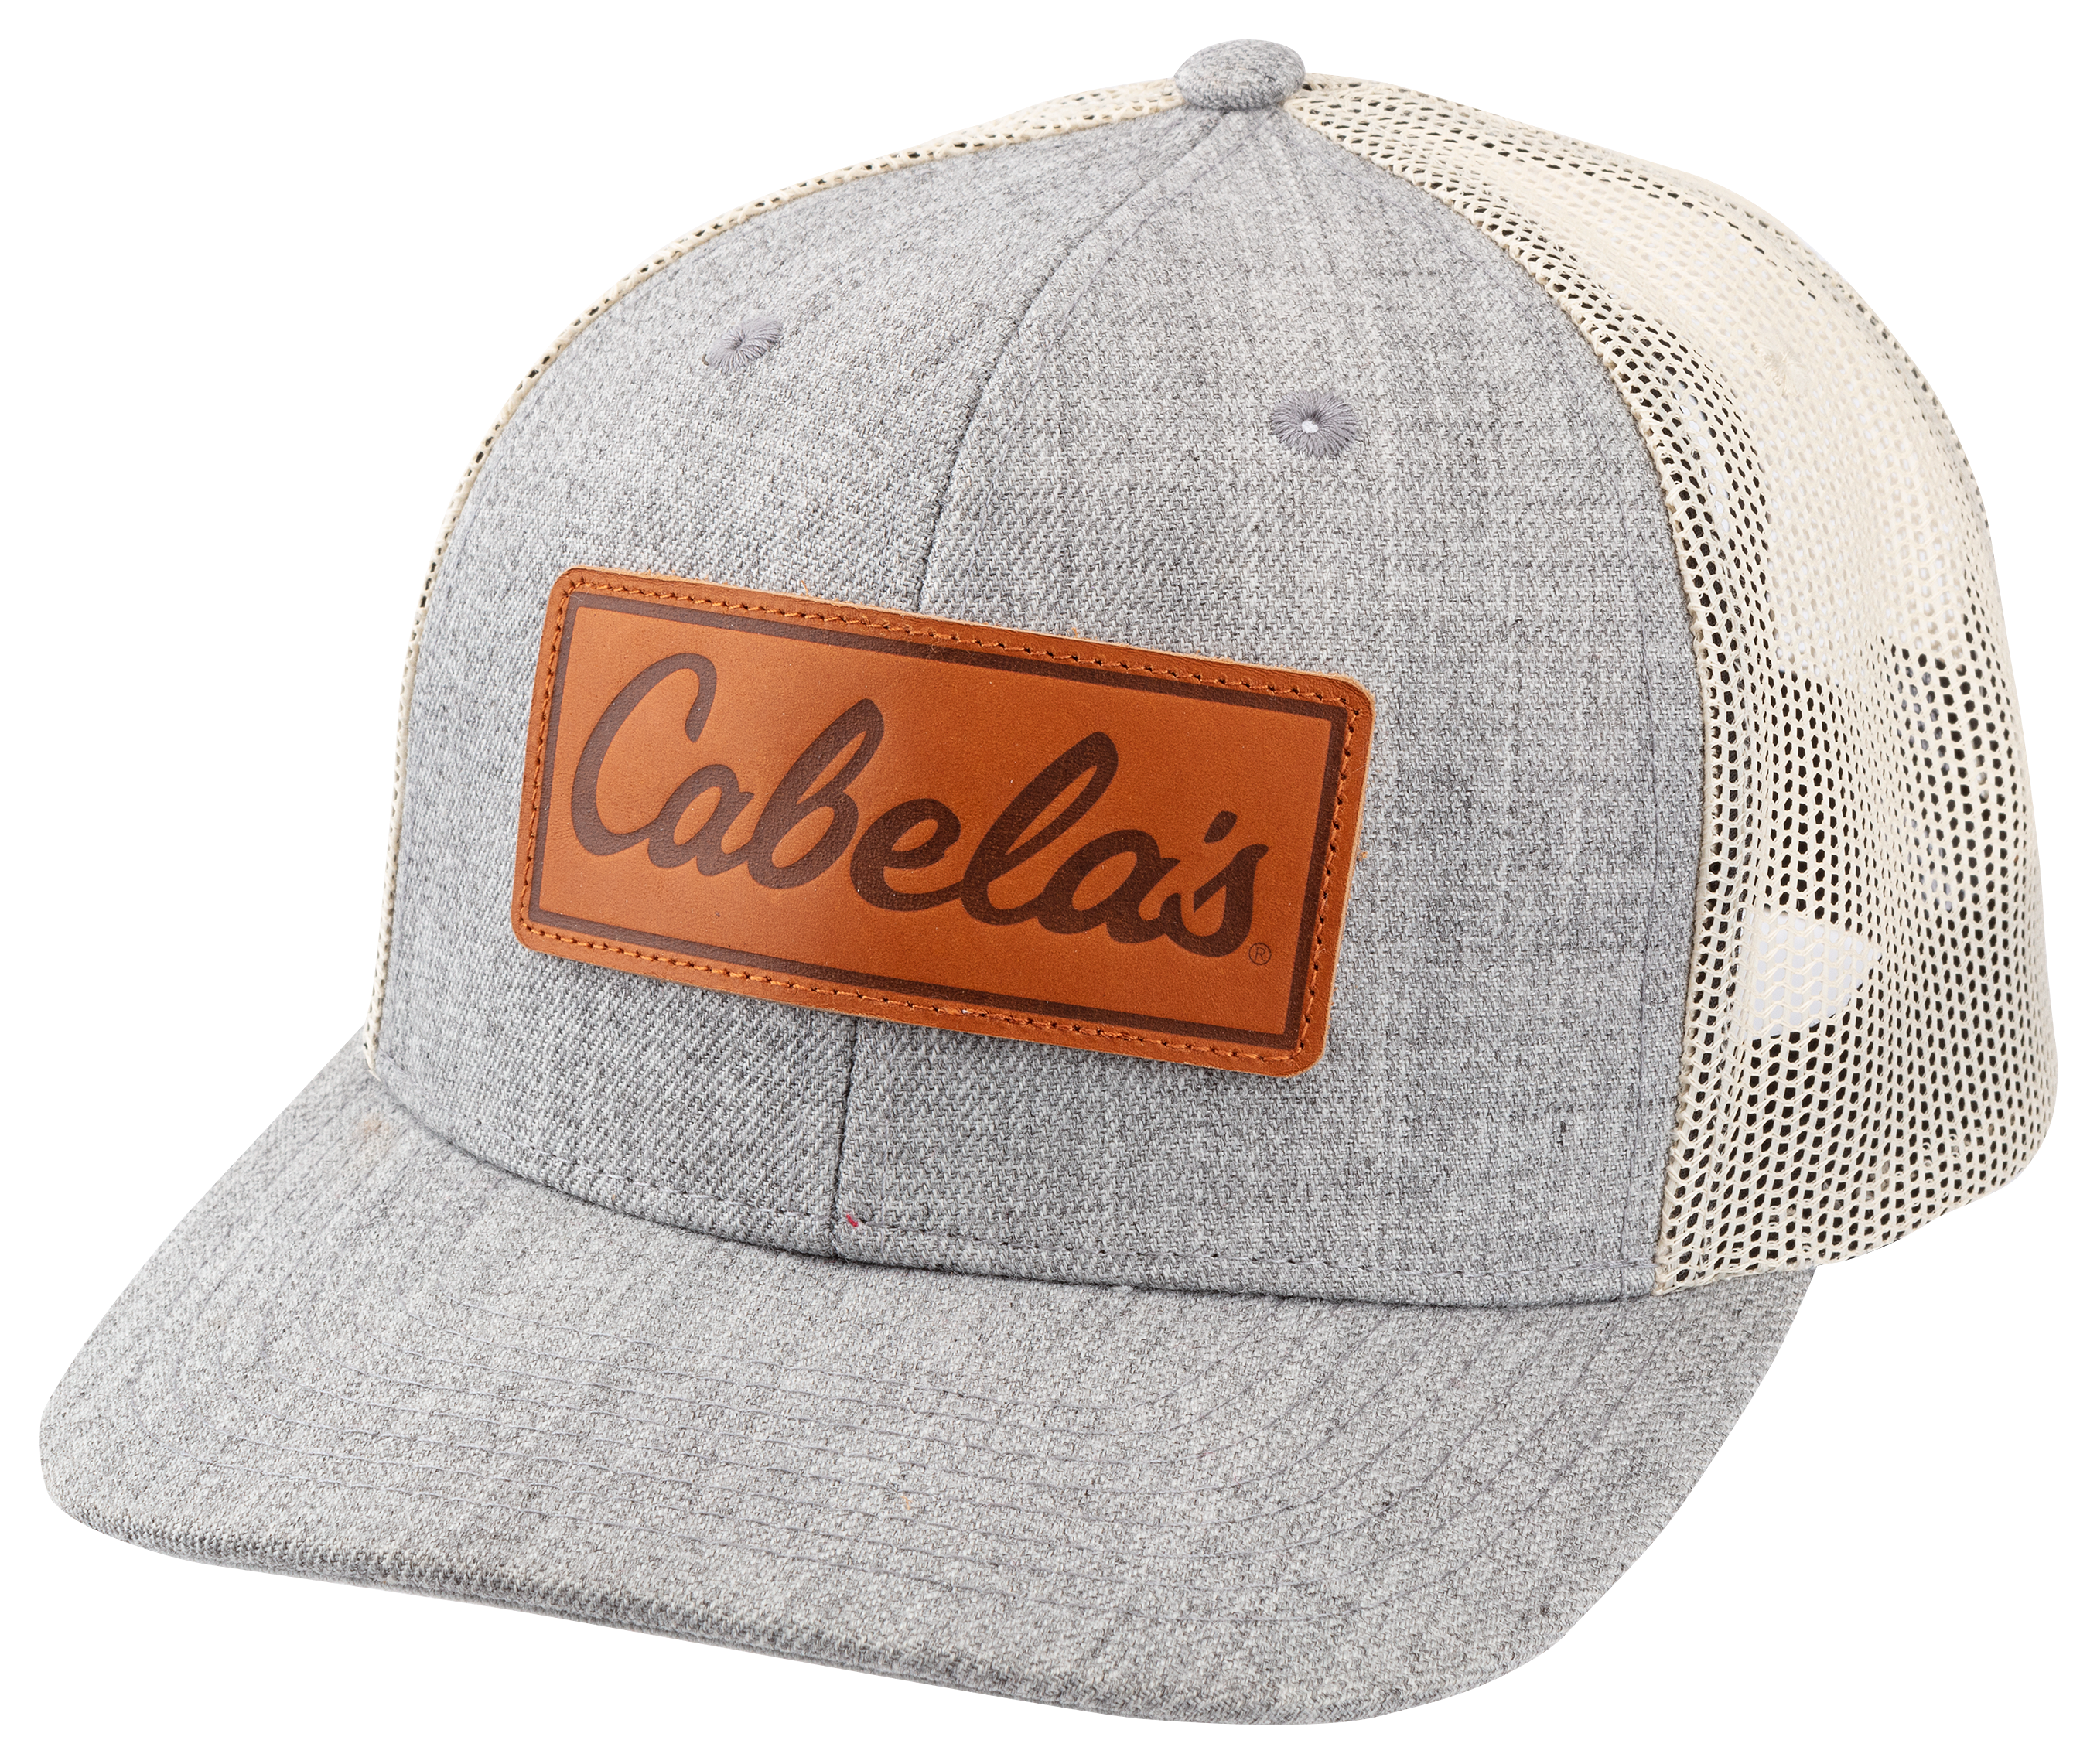 Cabela's Local Crowns Leather Patch Cap - Olive